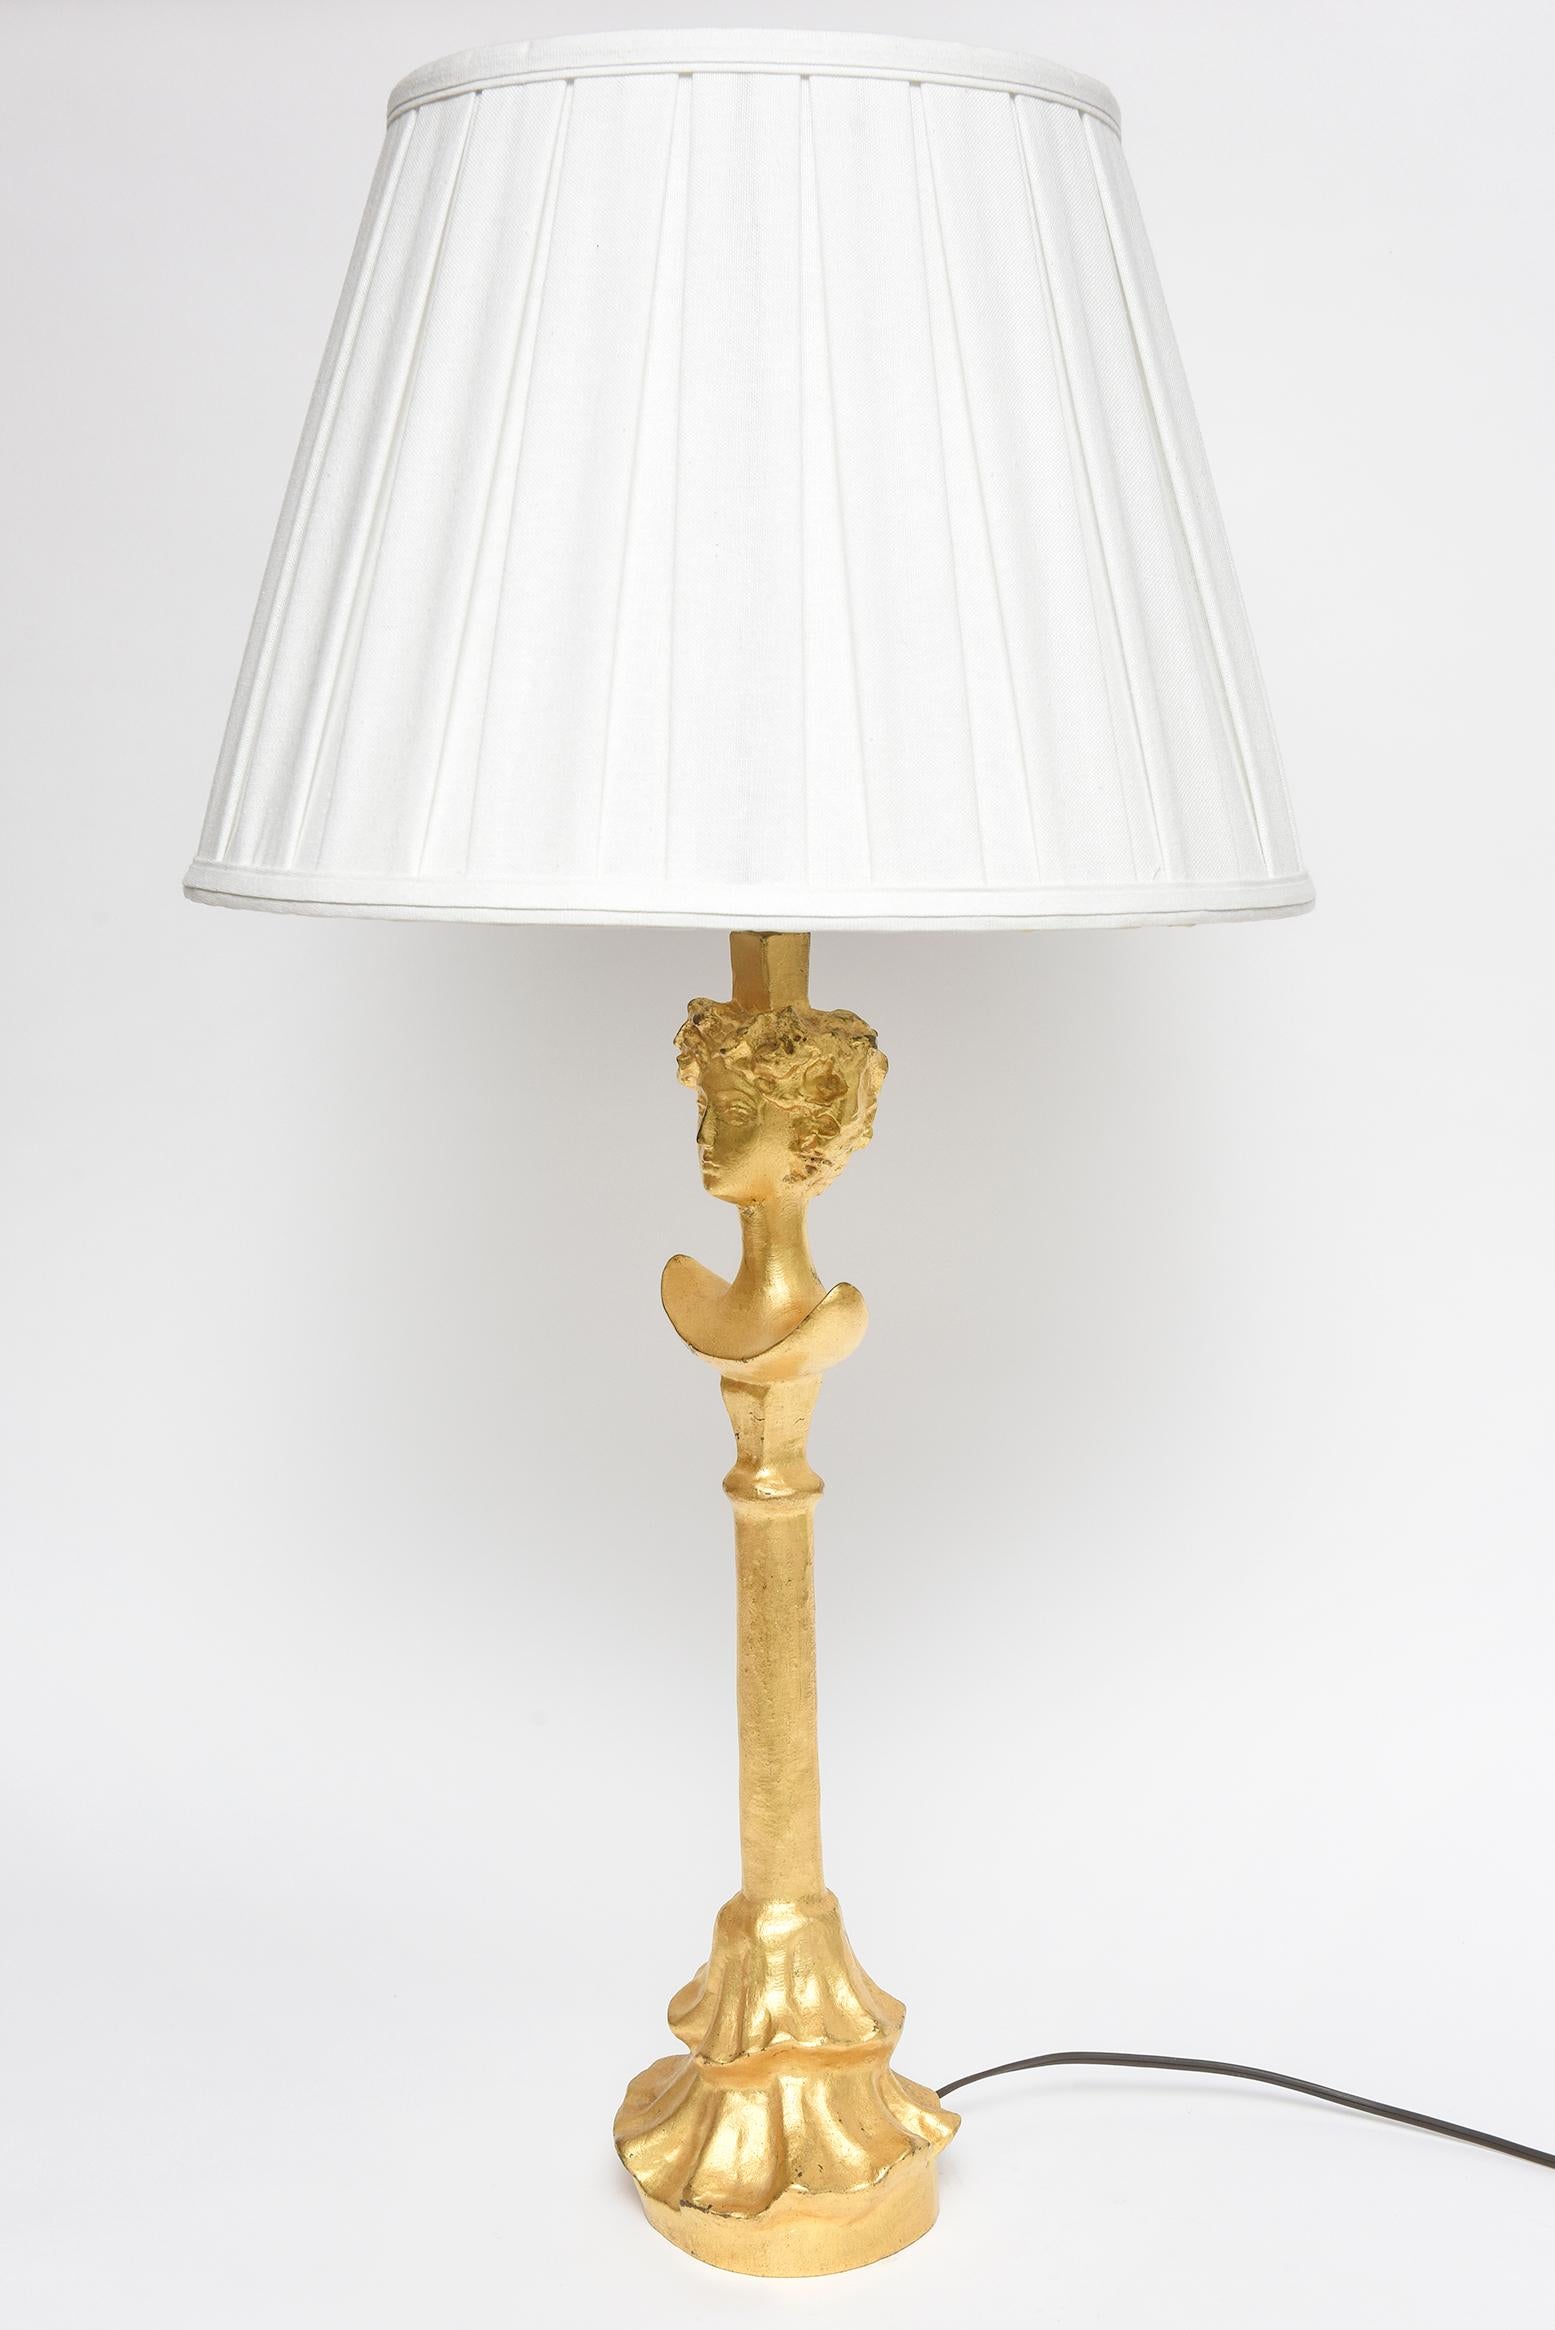 This piece is an authorized replica made by Nelson Rockefeller. Below is the description from The Nelson Rockefeller Collection Catalog: 

Giacometti 